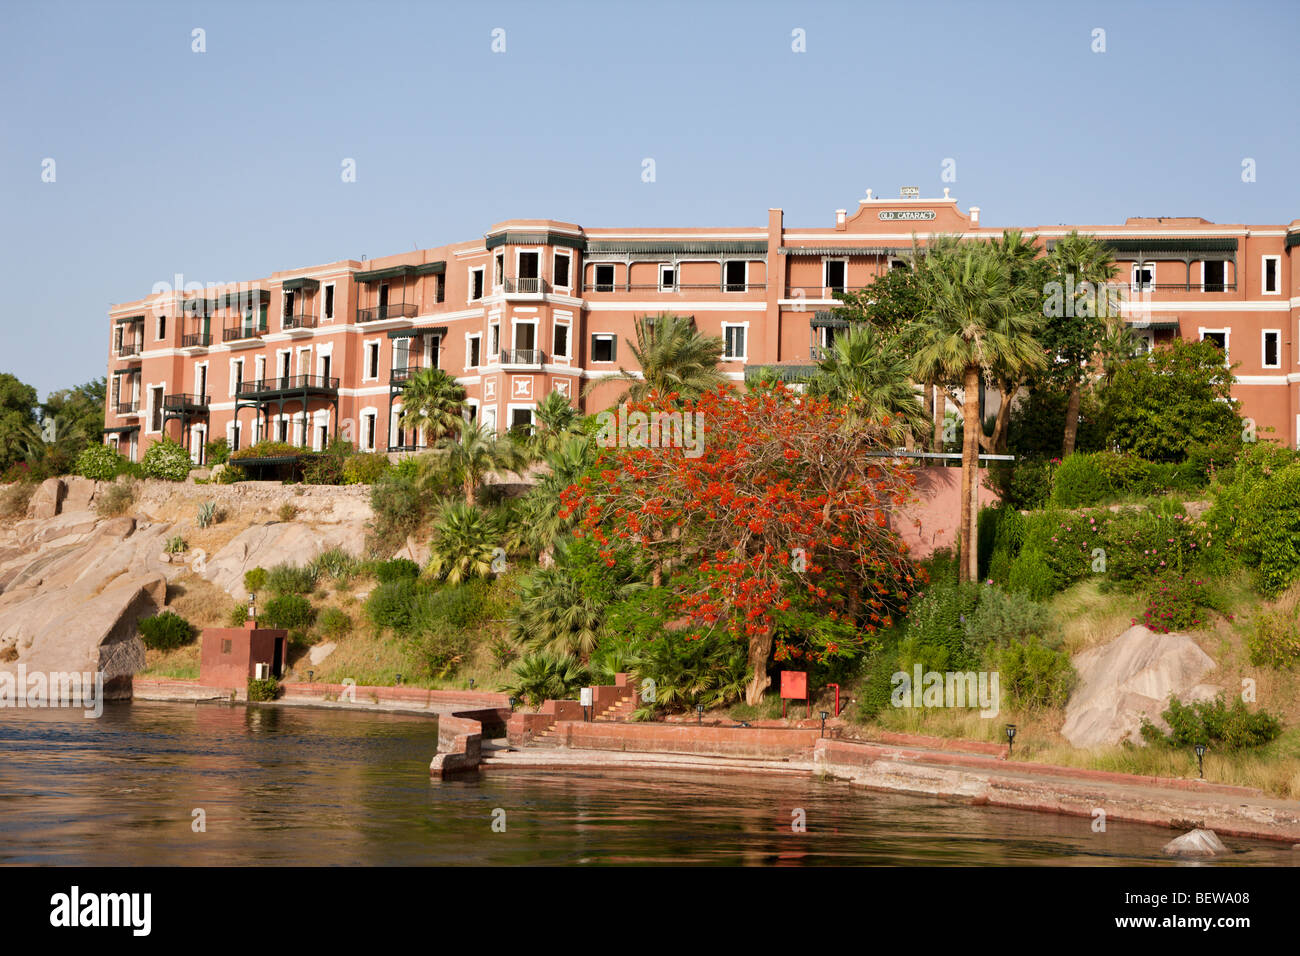 Traditional Hotel Old Cataract at Nile River, Aswan, Egypt Stock Photo